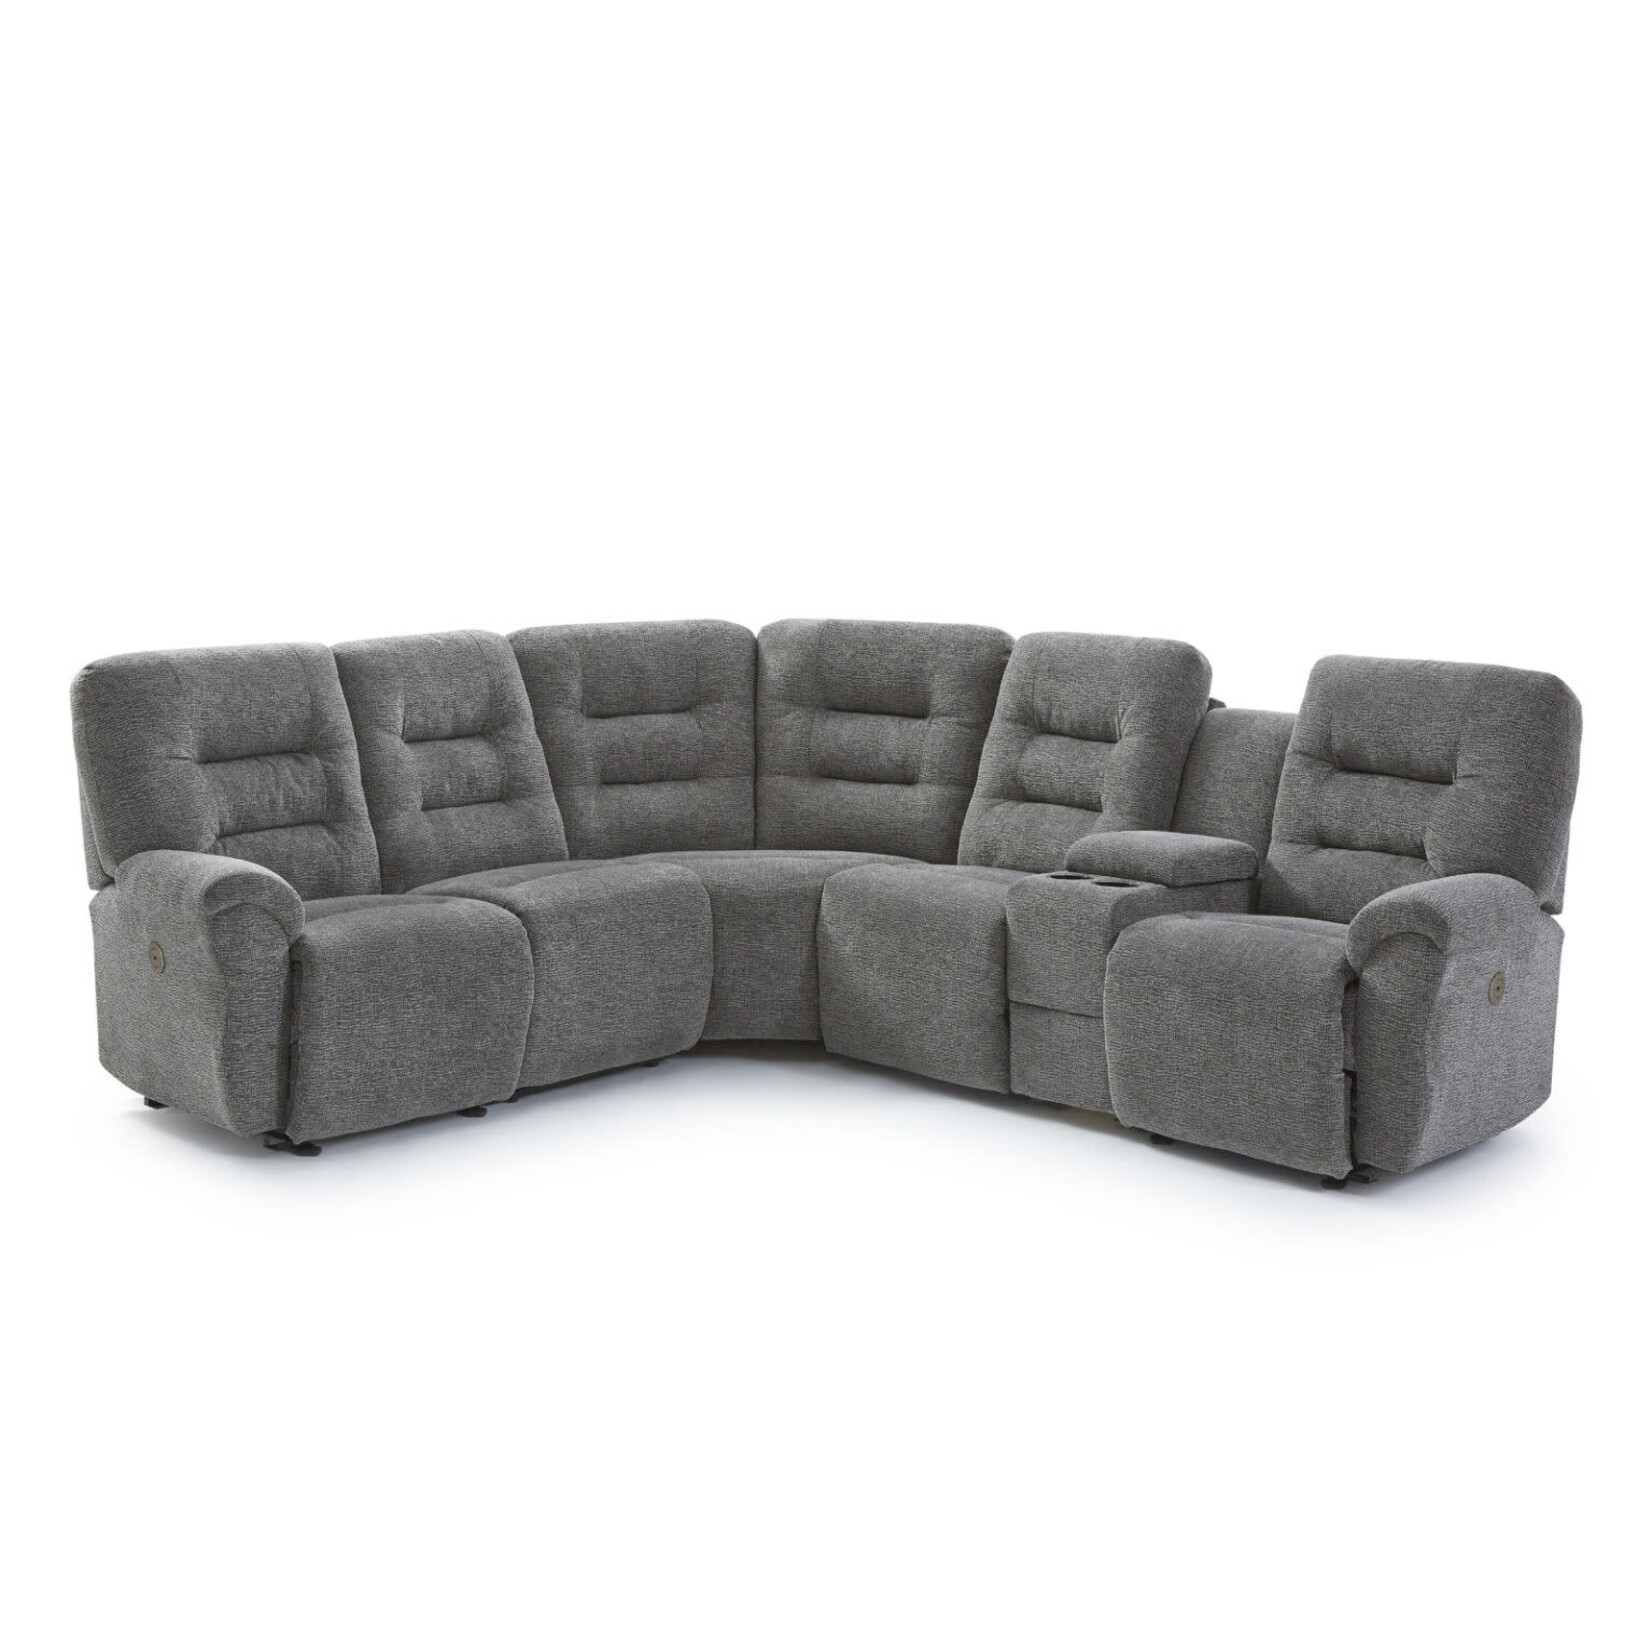 Best Chair Unity 6pc Sectional w/motion 21773 Fog